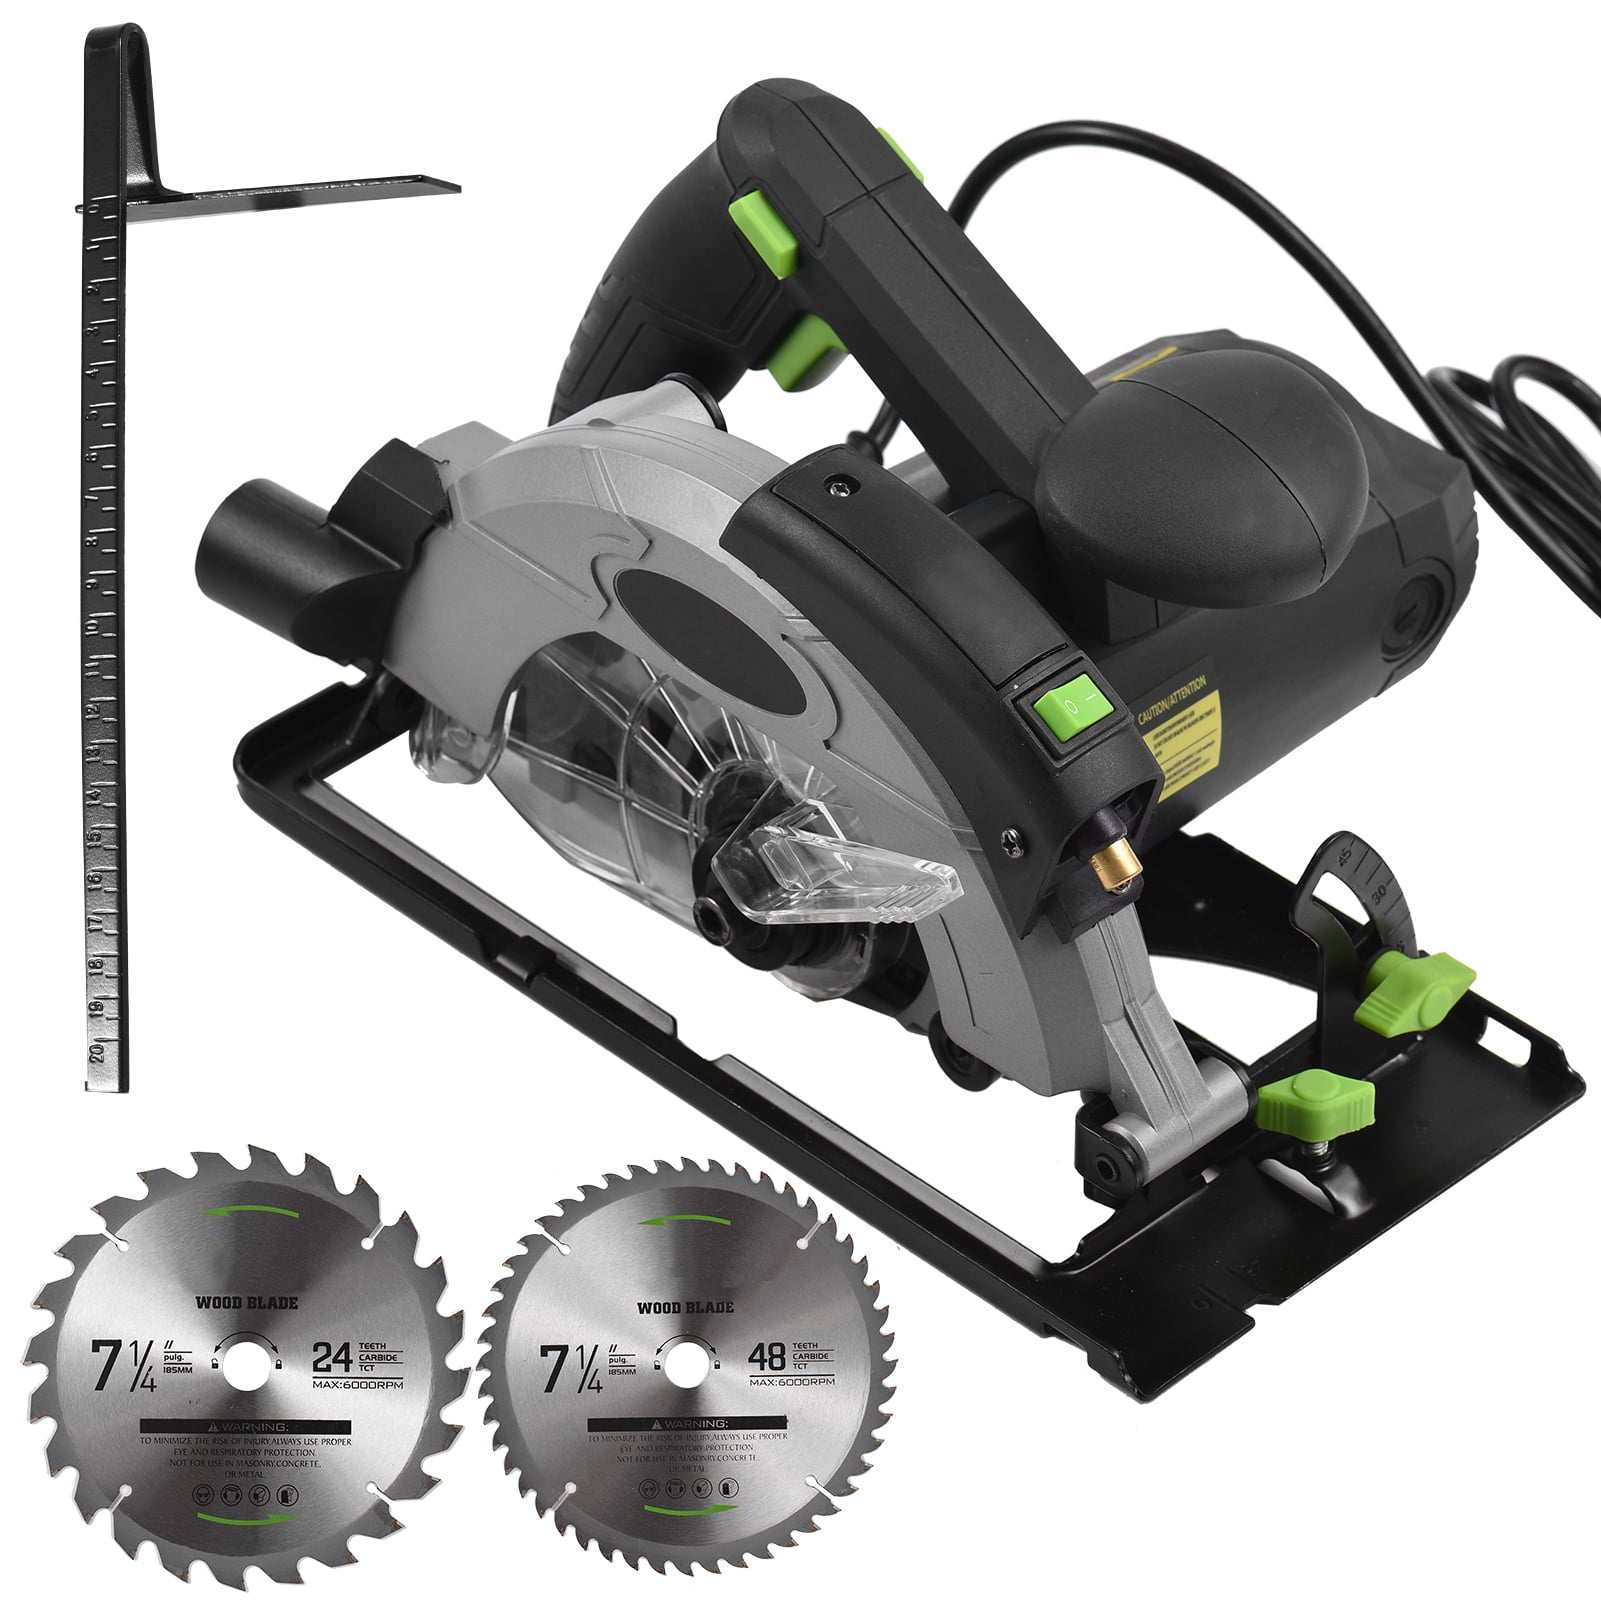 Dcenta Circular Saw, 5500RPM Corded Power Circular Saw with 7-1/4'' Saw  Blade and Guide, for Cutting Wood Metal and Plastic